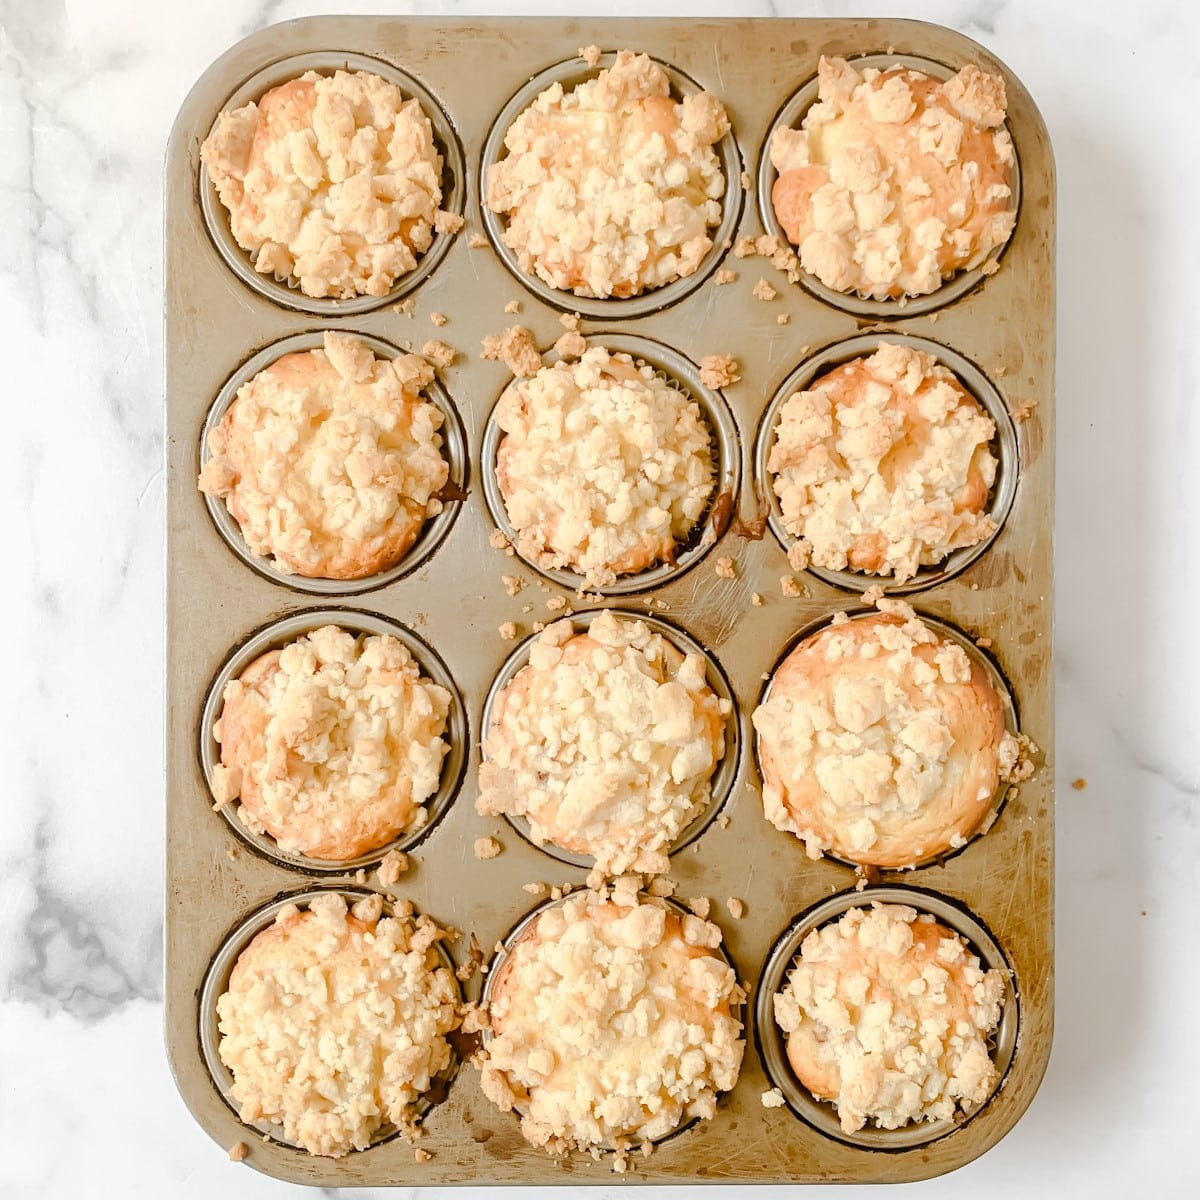 Baked peach muffins in a muffin pan.